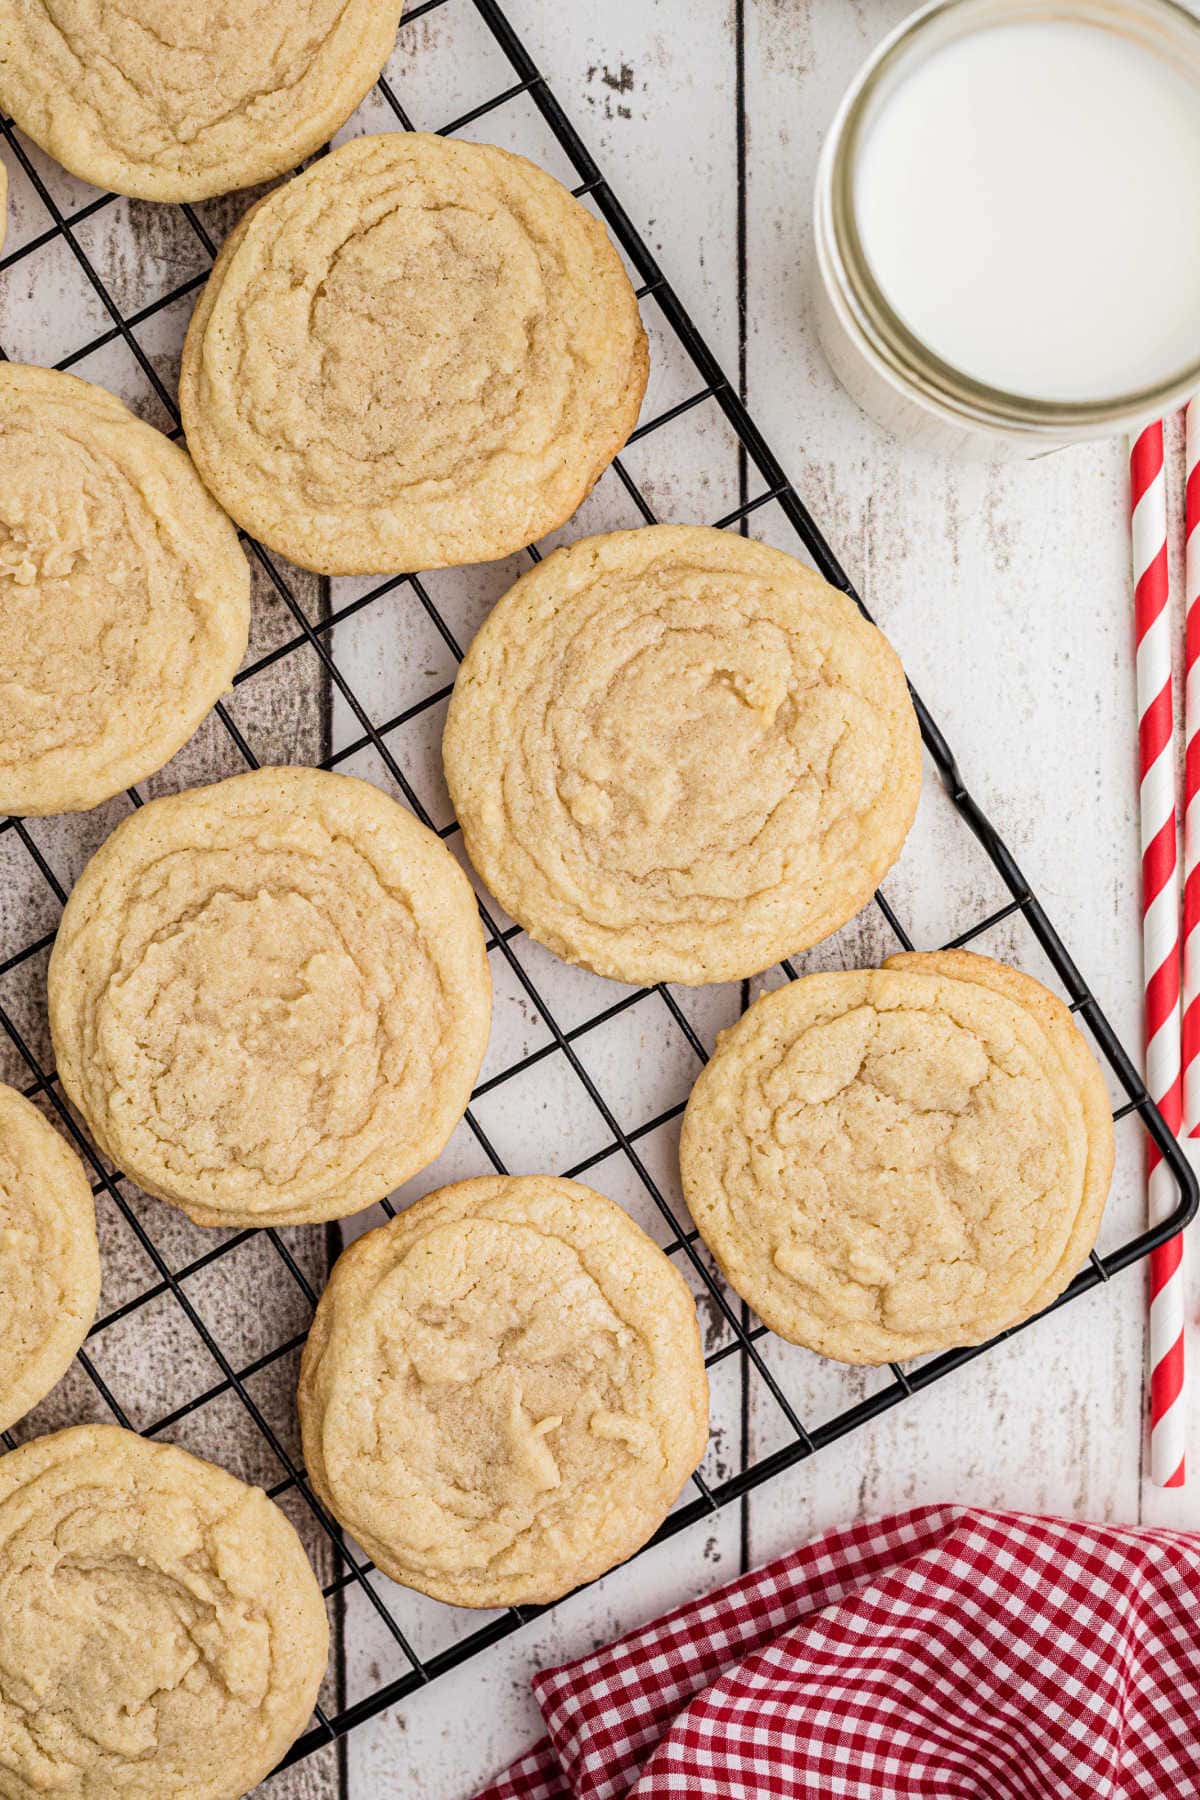 Cookie Decorating Supplies: Everything from Basic to Splurge!